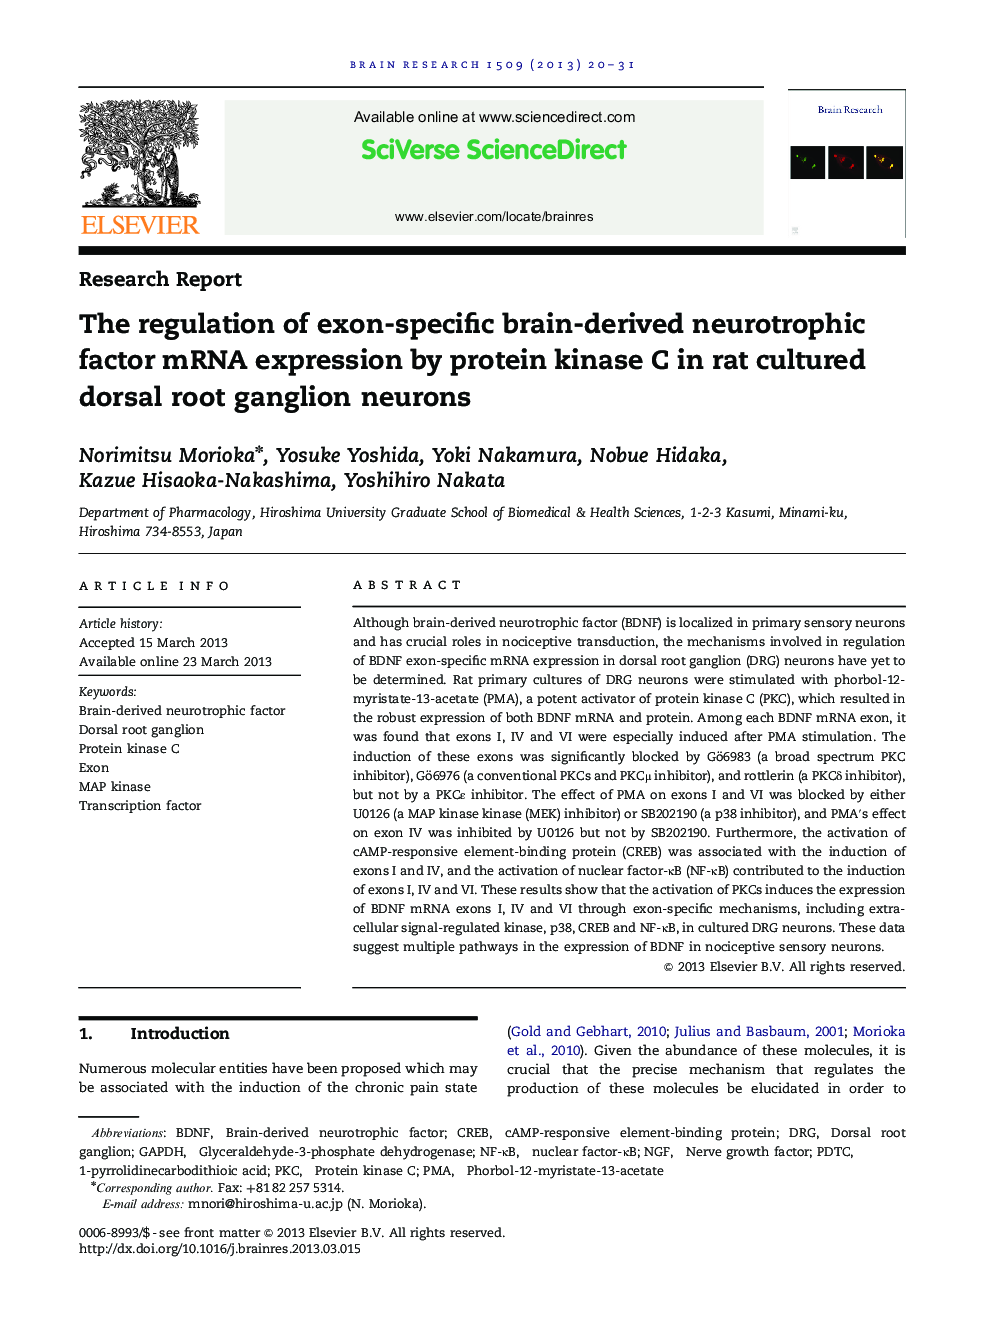 The regulation of exon-specific brain-derived neurotrophic factor mRNA expression by protein kinase C in rat cultured dorsal root ganglion neurons